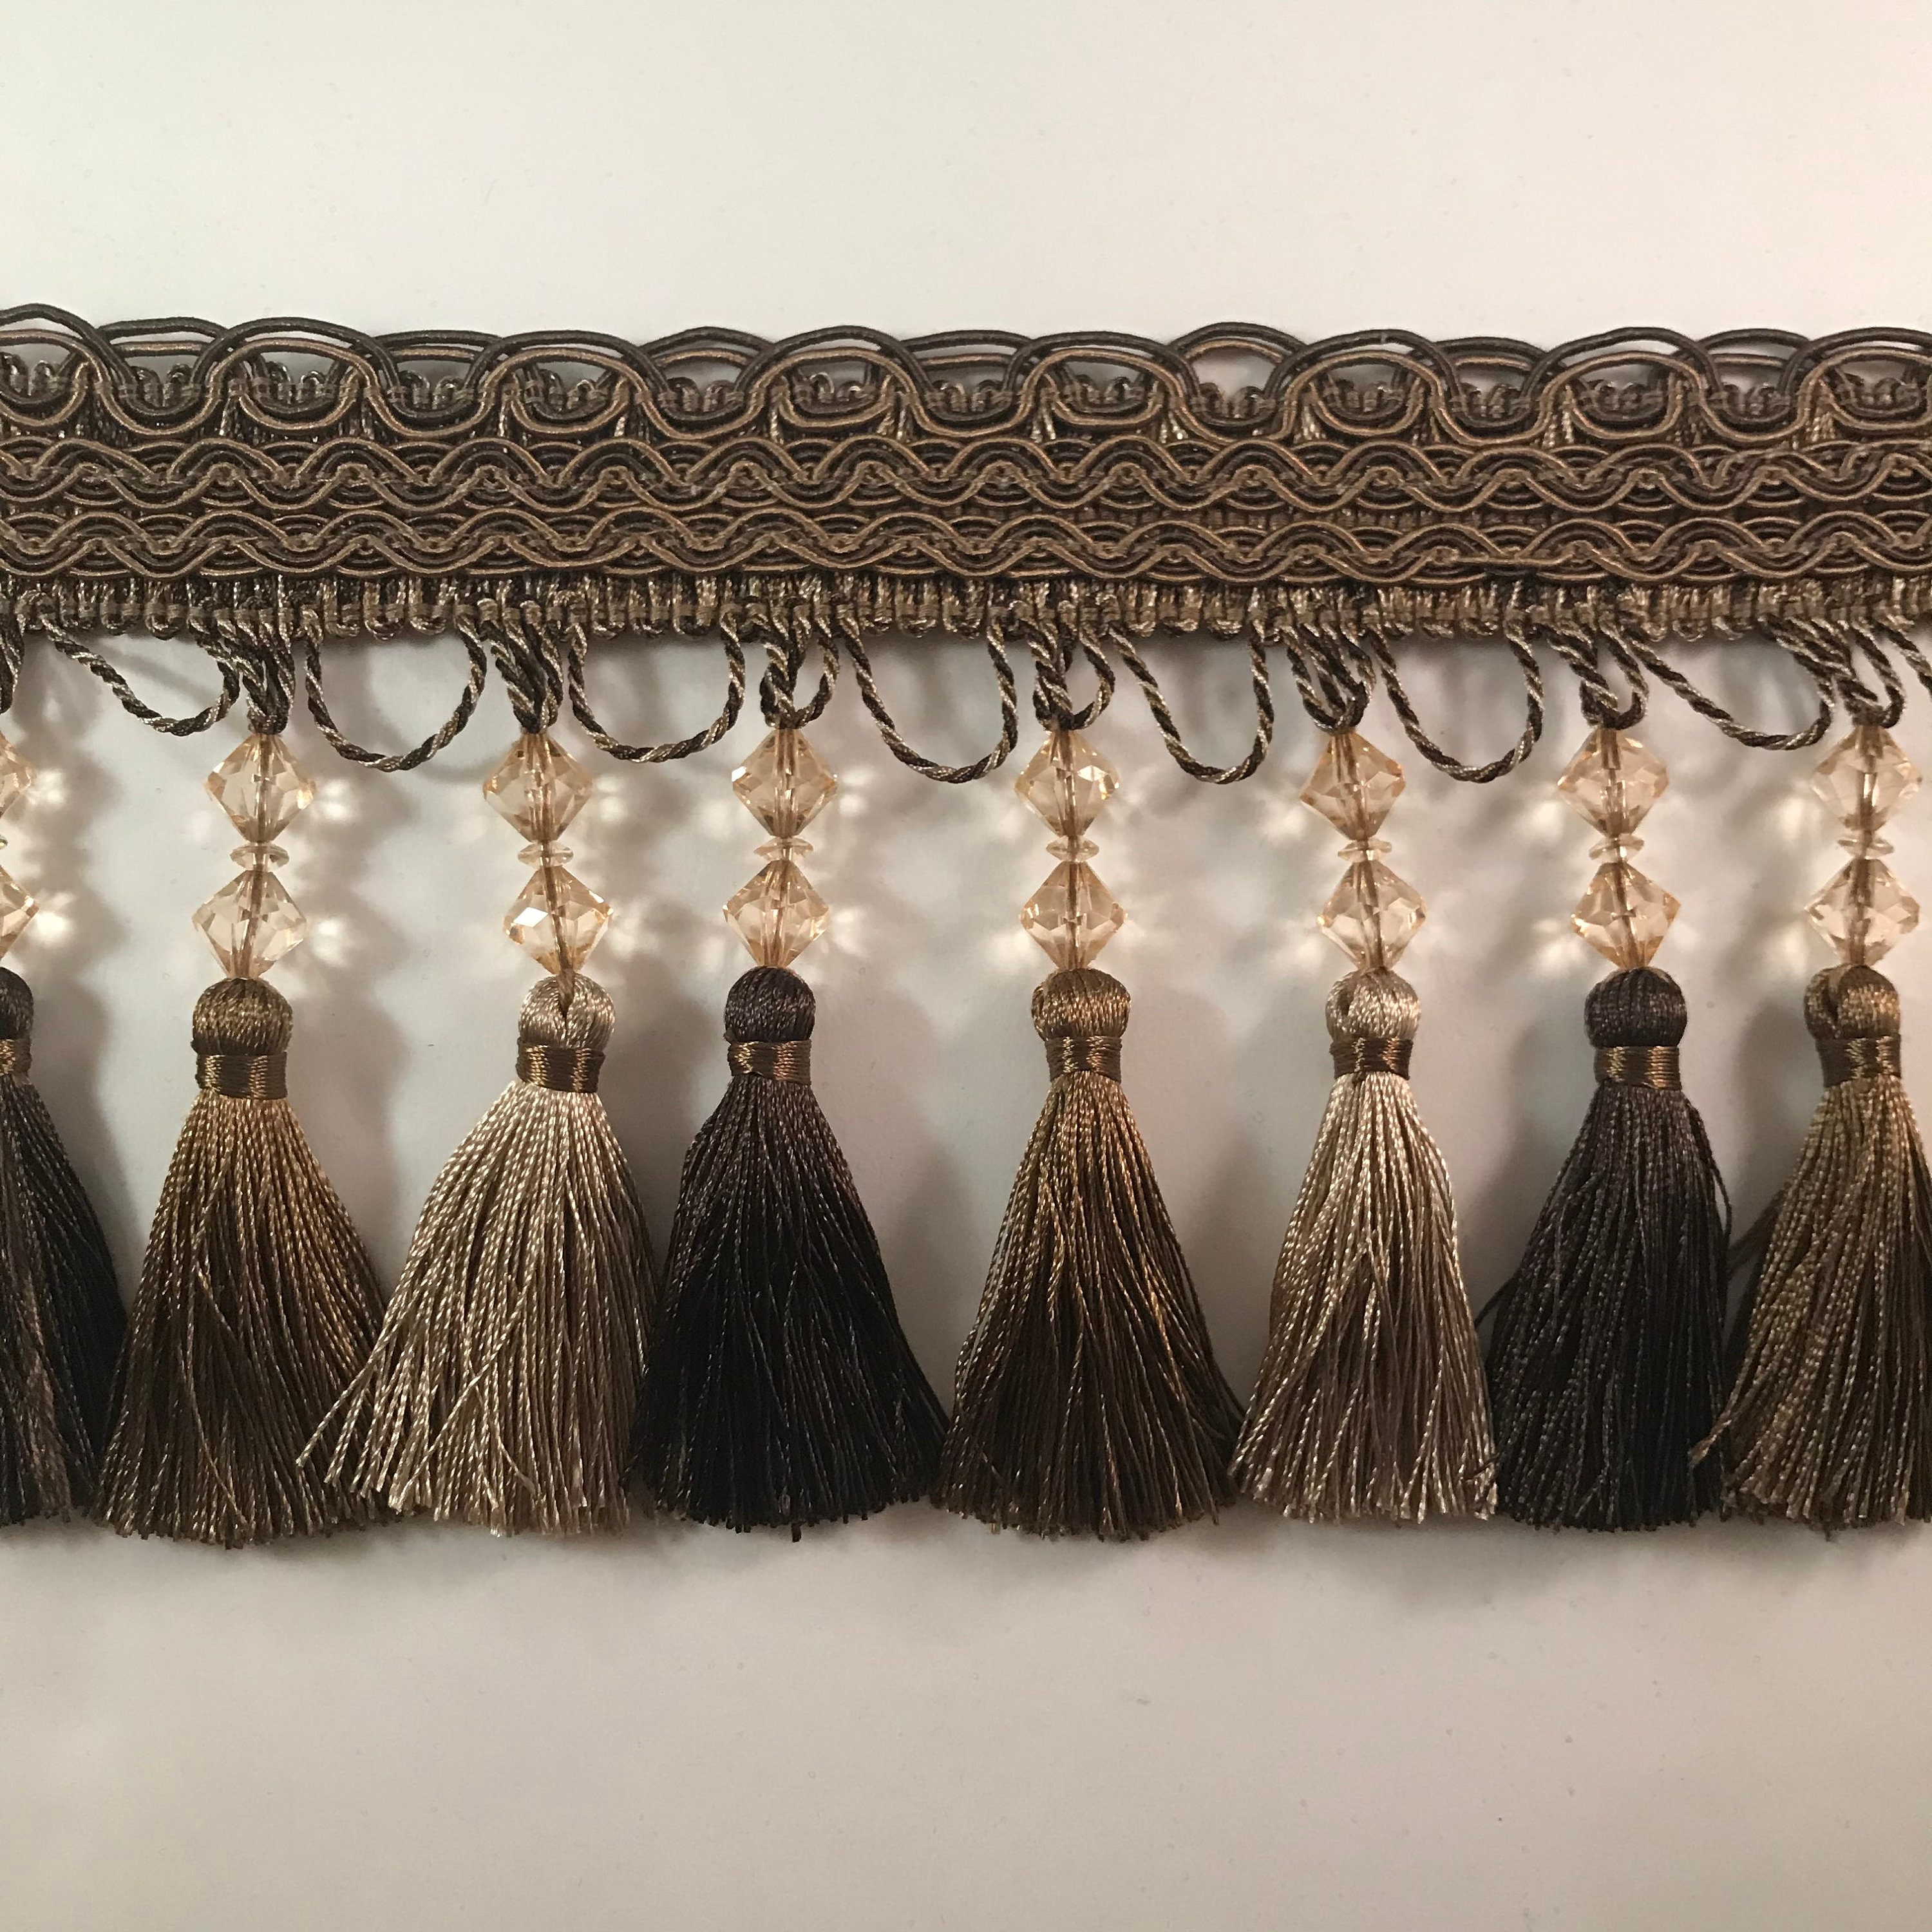 Store 2 — Trims and Beads